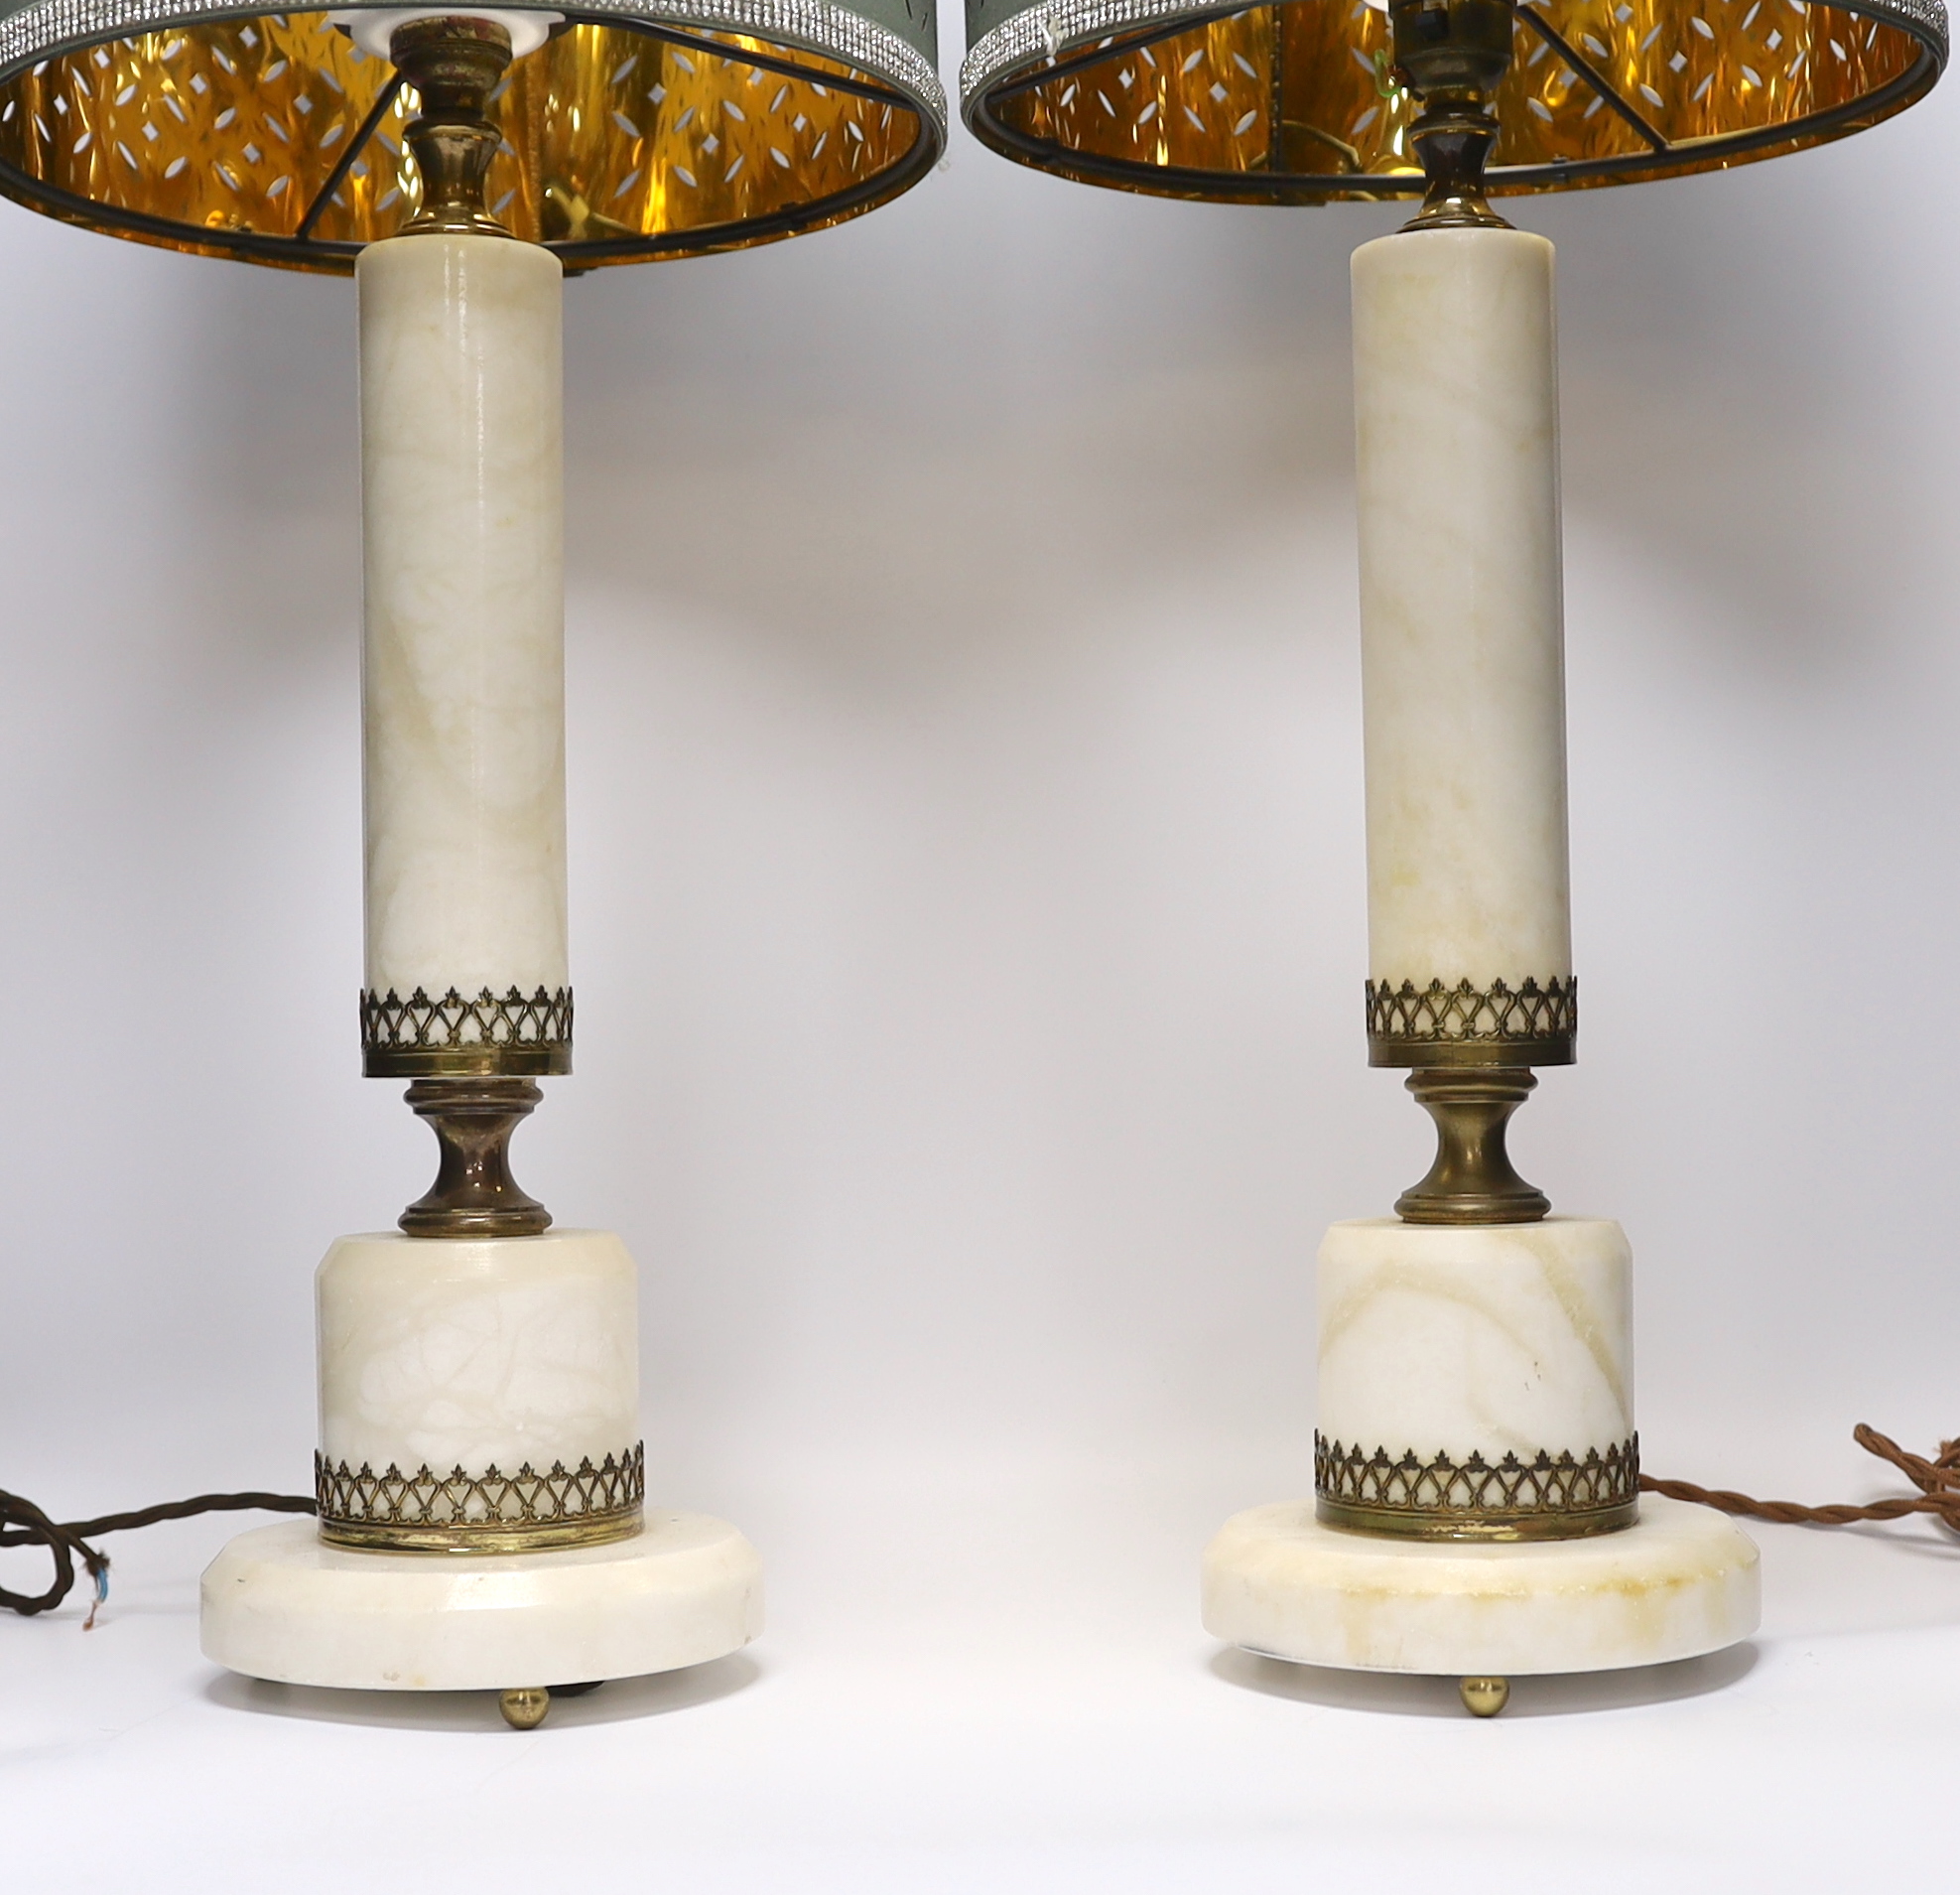 A pair of white marble column table lamps with gilt metal mounts and shades, 61cm high overall - Image 2 of 4